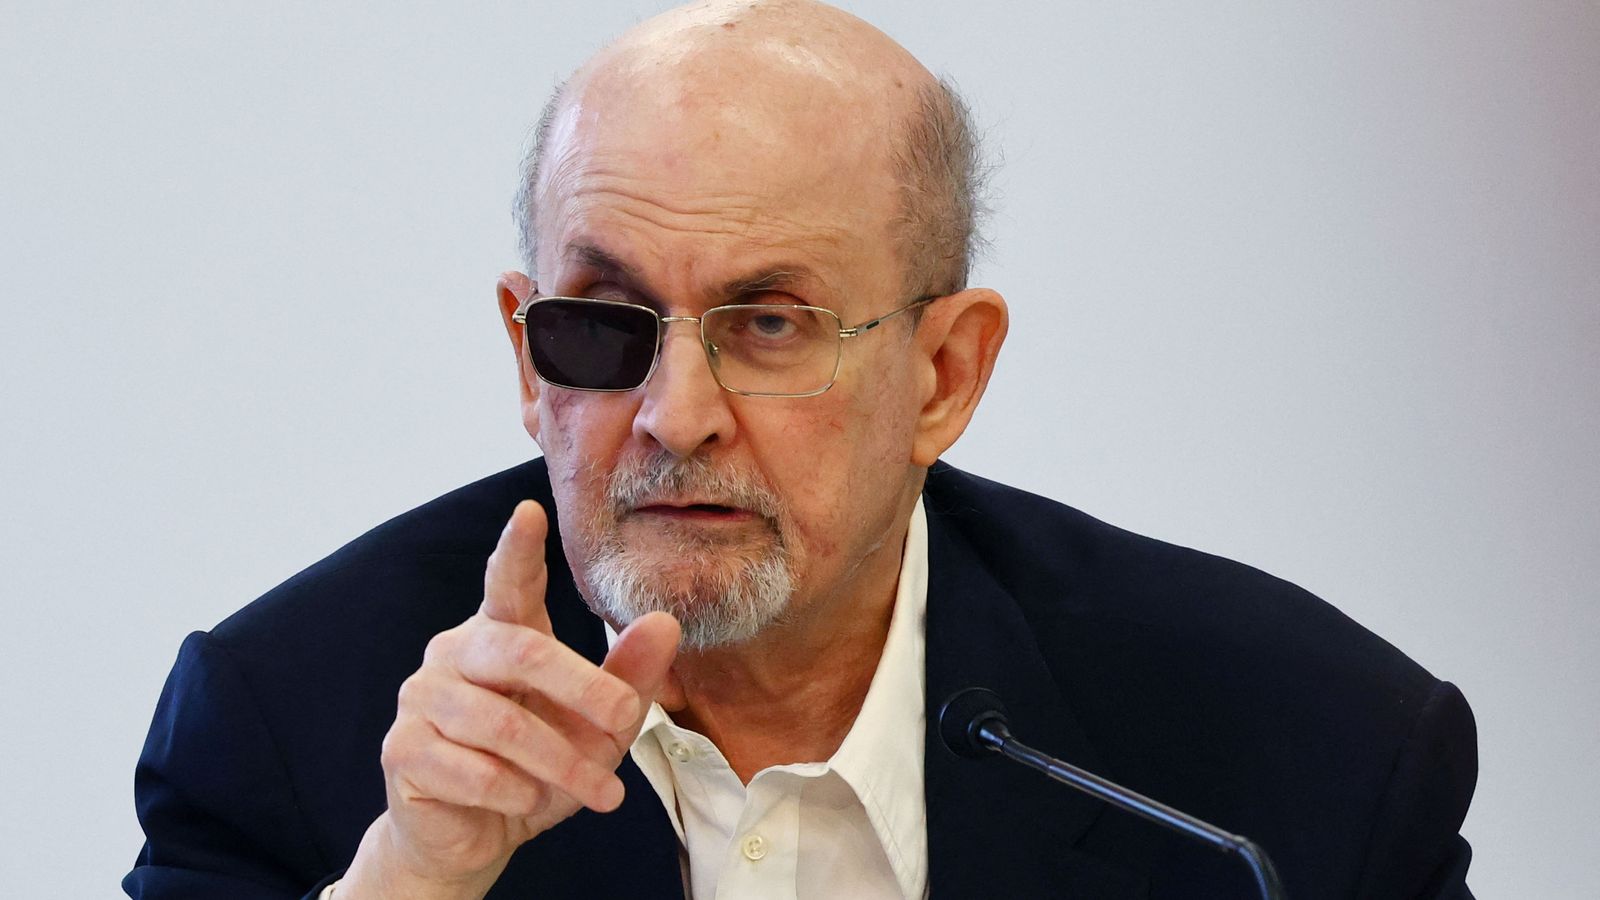 Salman Rushdie: Author says knife attacker came at him like a ‘missile’